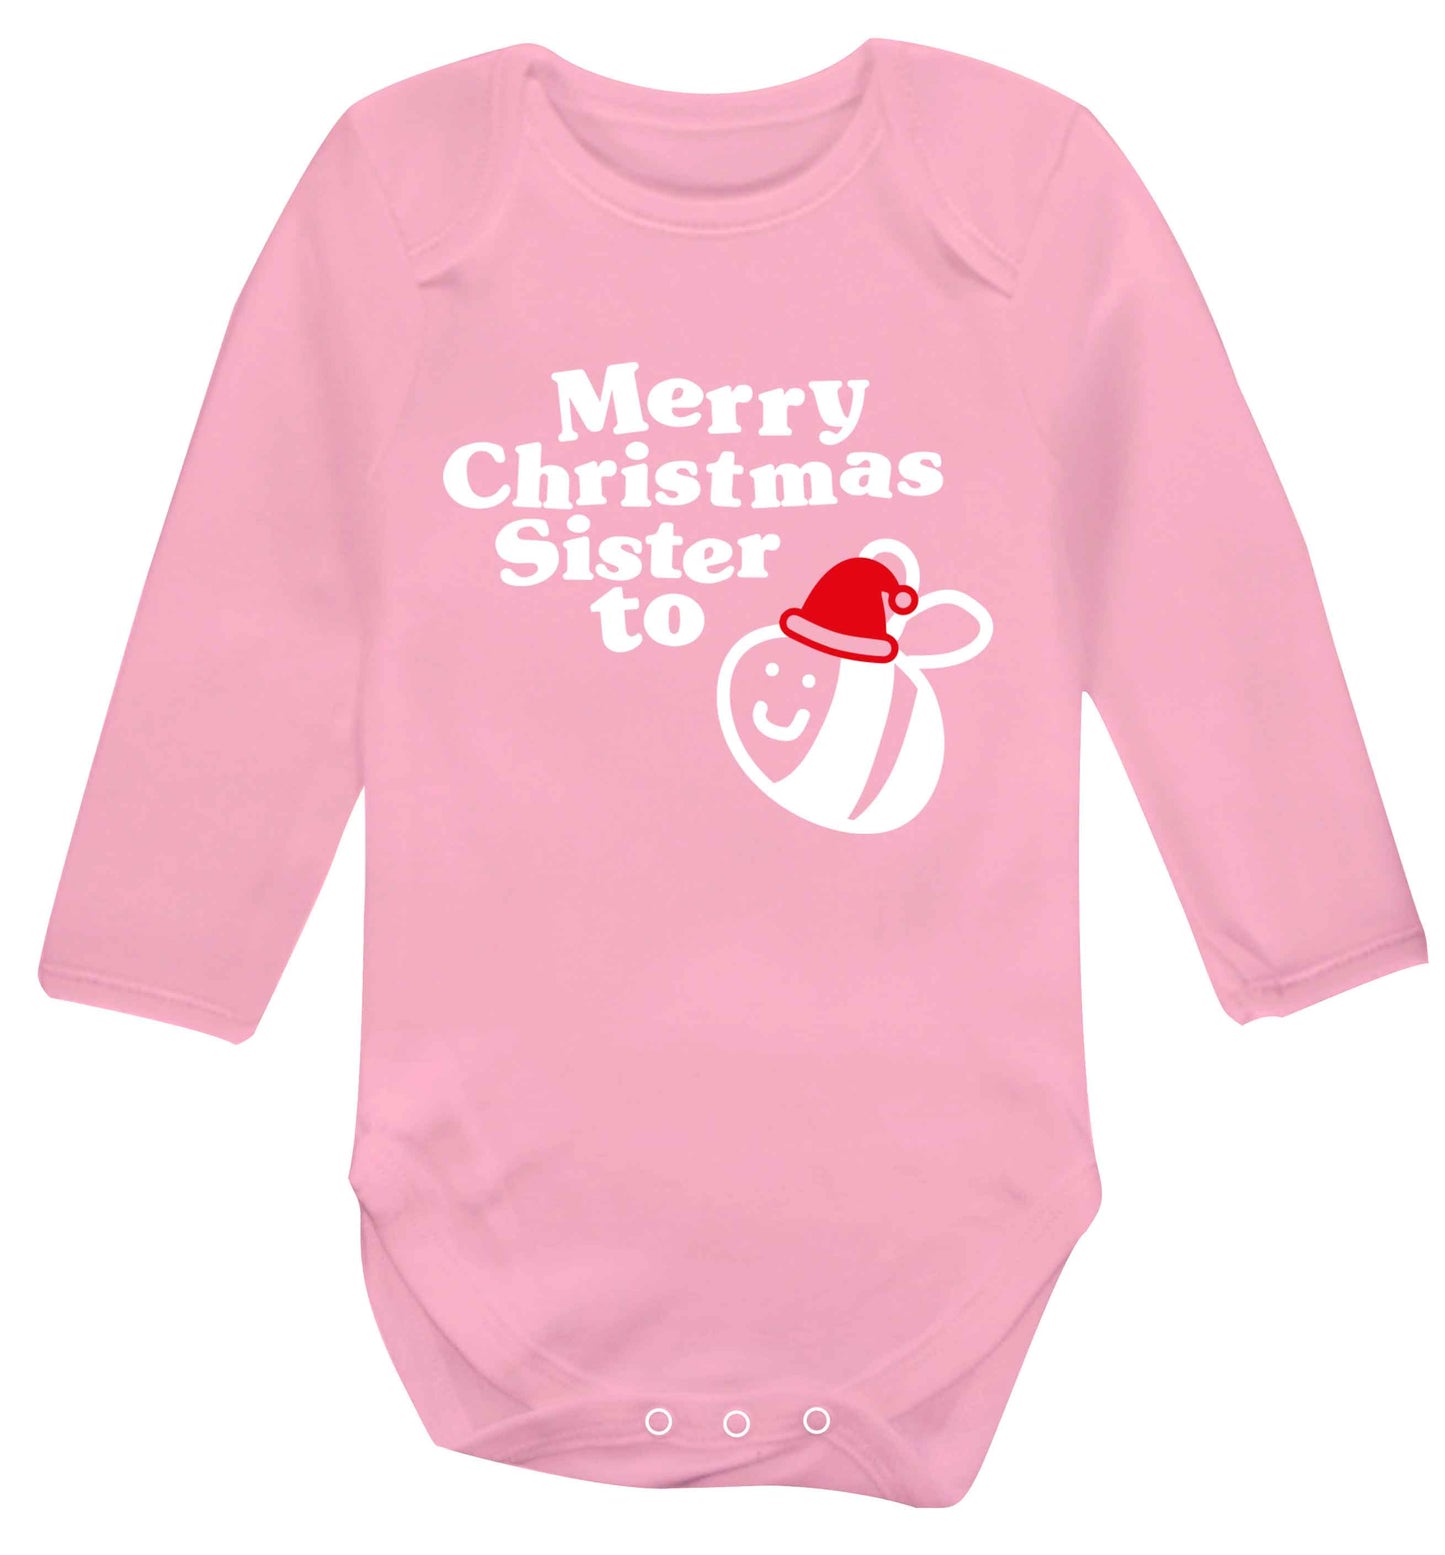 Merry Christmas sister to be Baby Vest long sleeved pale pink 6-12 months